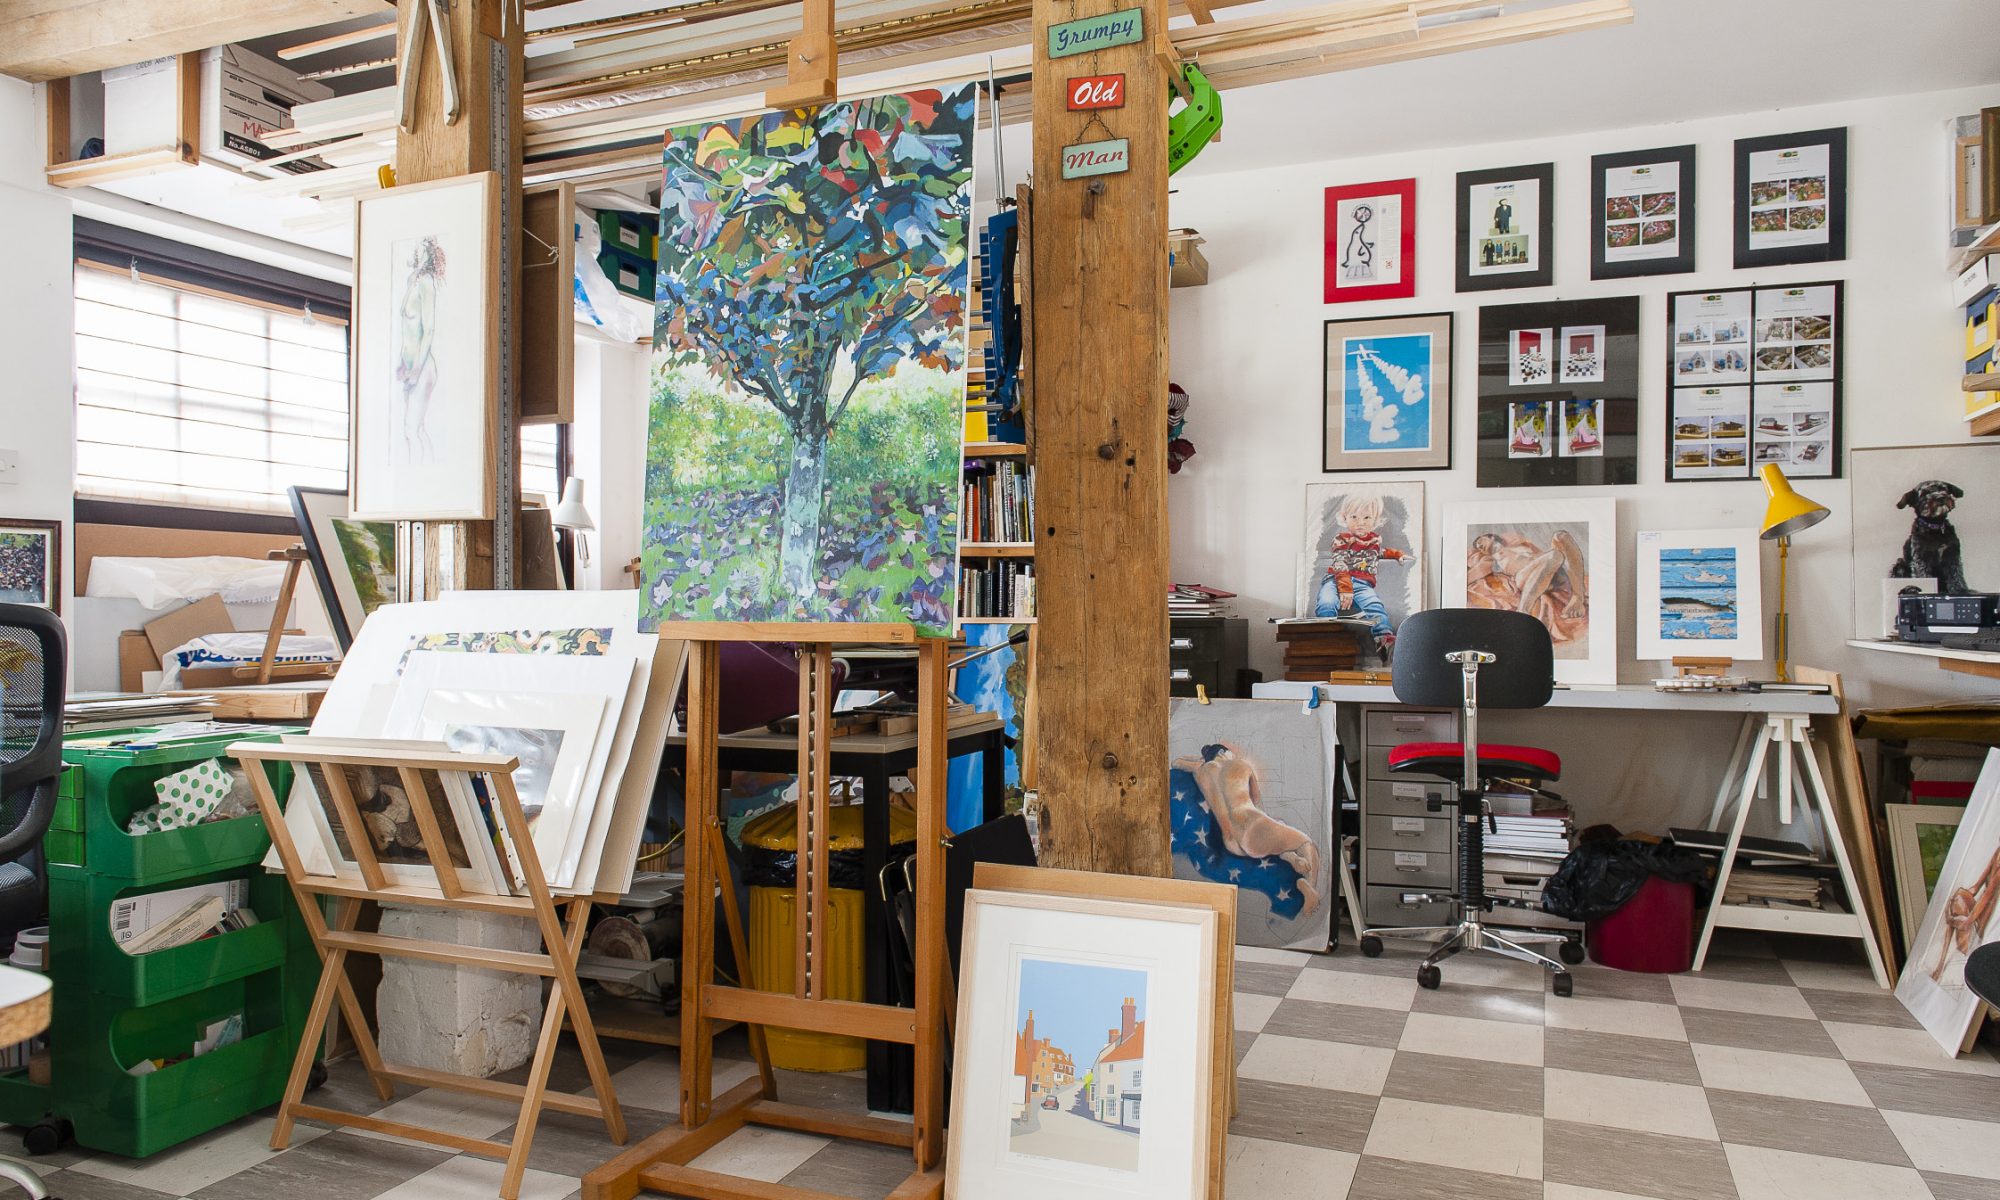 The studio, at the end of the house, offers the perfect space for Dave to create his rural and village street scenes and Sue her portraits and life drawings